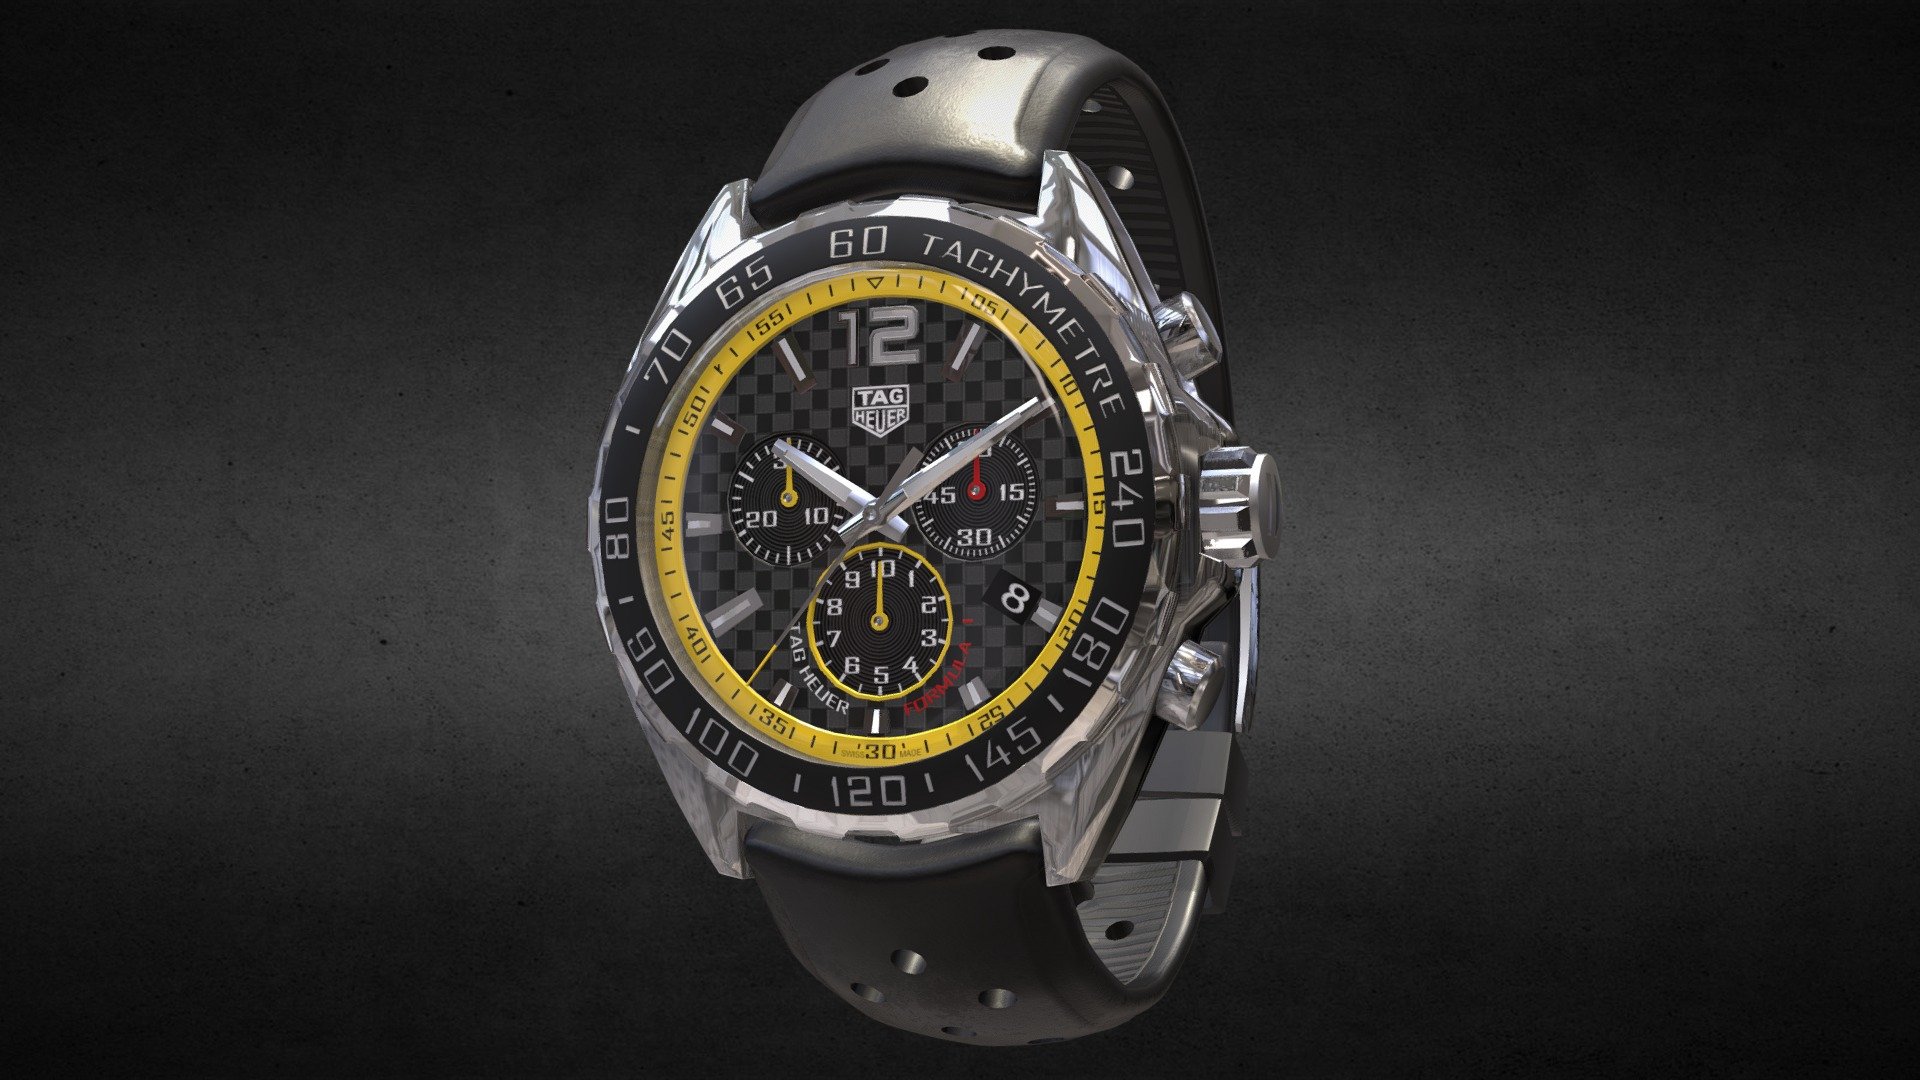 Awesome stainless steel Tag Heuer Formula 1 Carbon Fiber Quartz Chronograph watch․
Use for Unreal Engine 4 and Unity3D. Try in augmented reality in the AR-Watches app. 
Links to the app: Android, iOS

Currently available for download in FBX format.

3D model developed by AR-Watches

Disclaimer: We do not own the design of the watch, we only made the 3D model 3d model